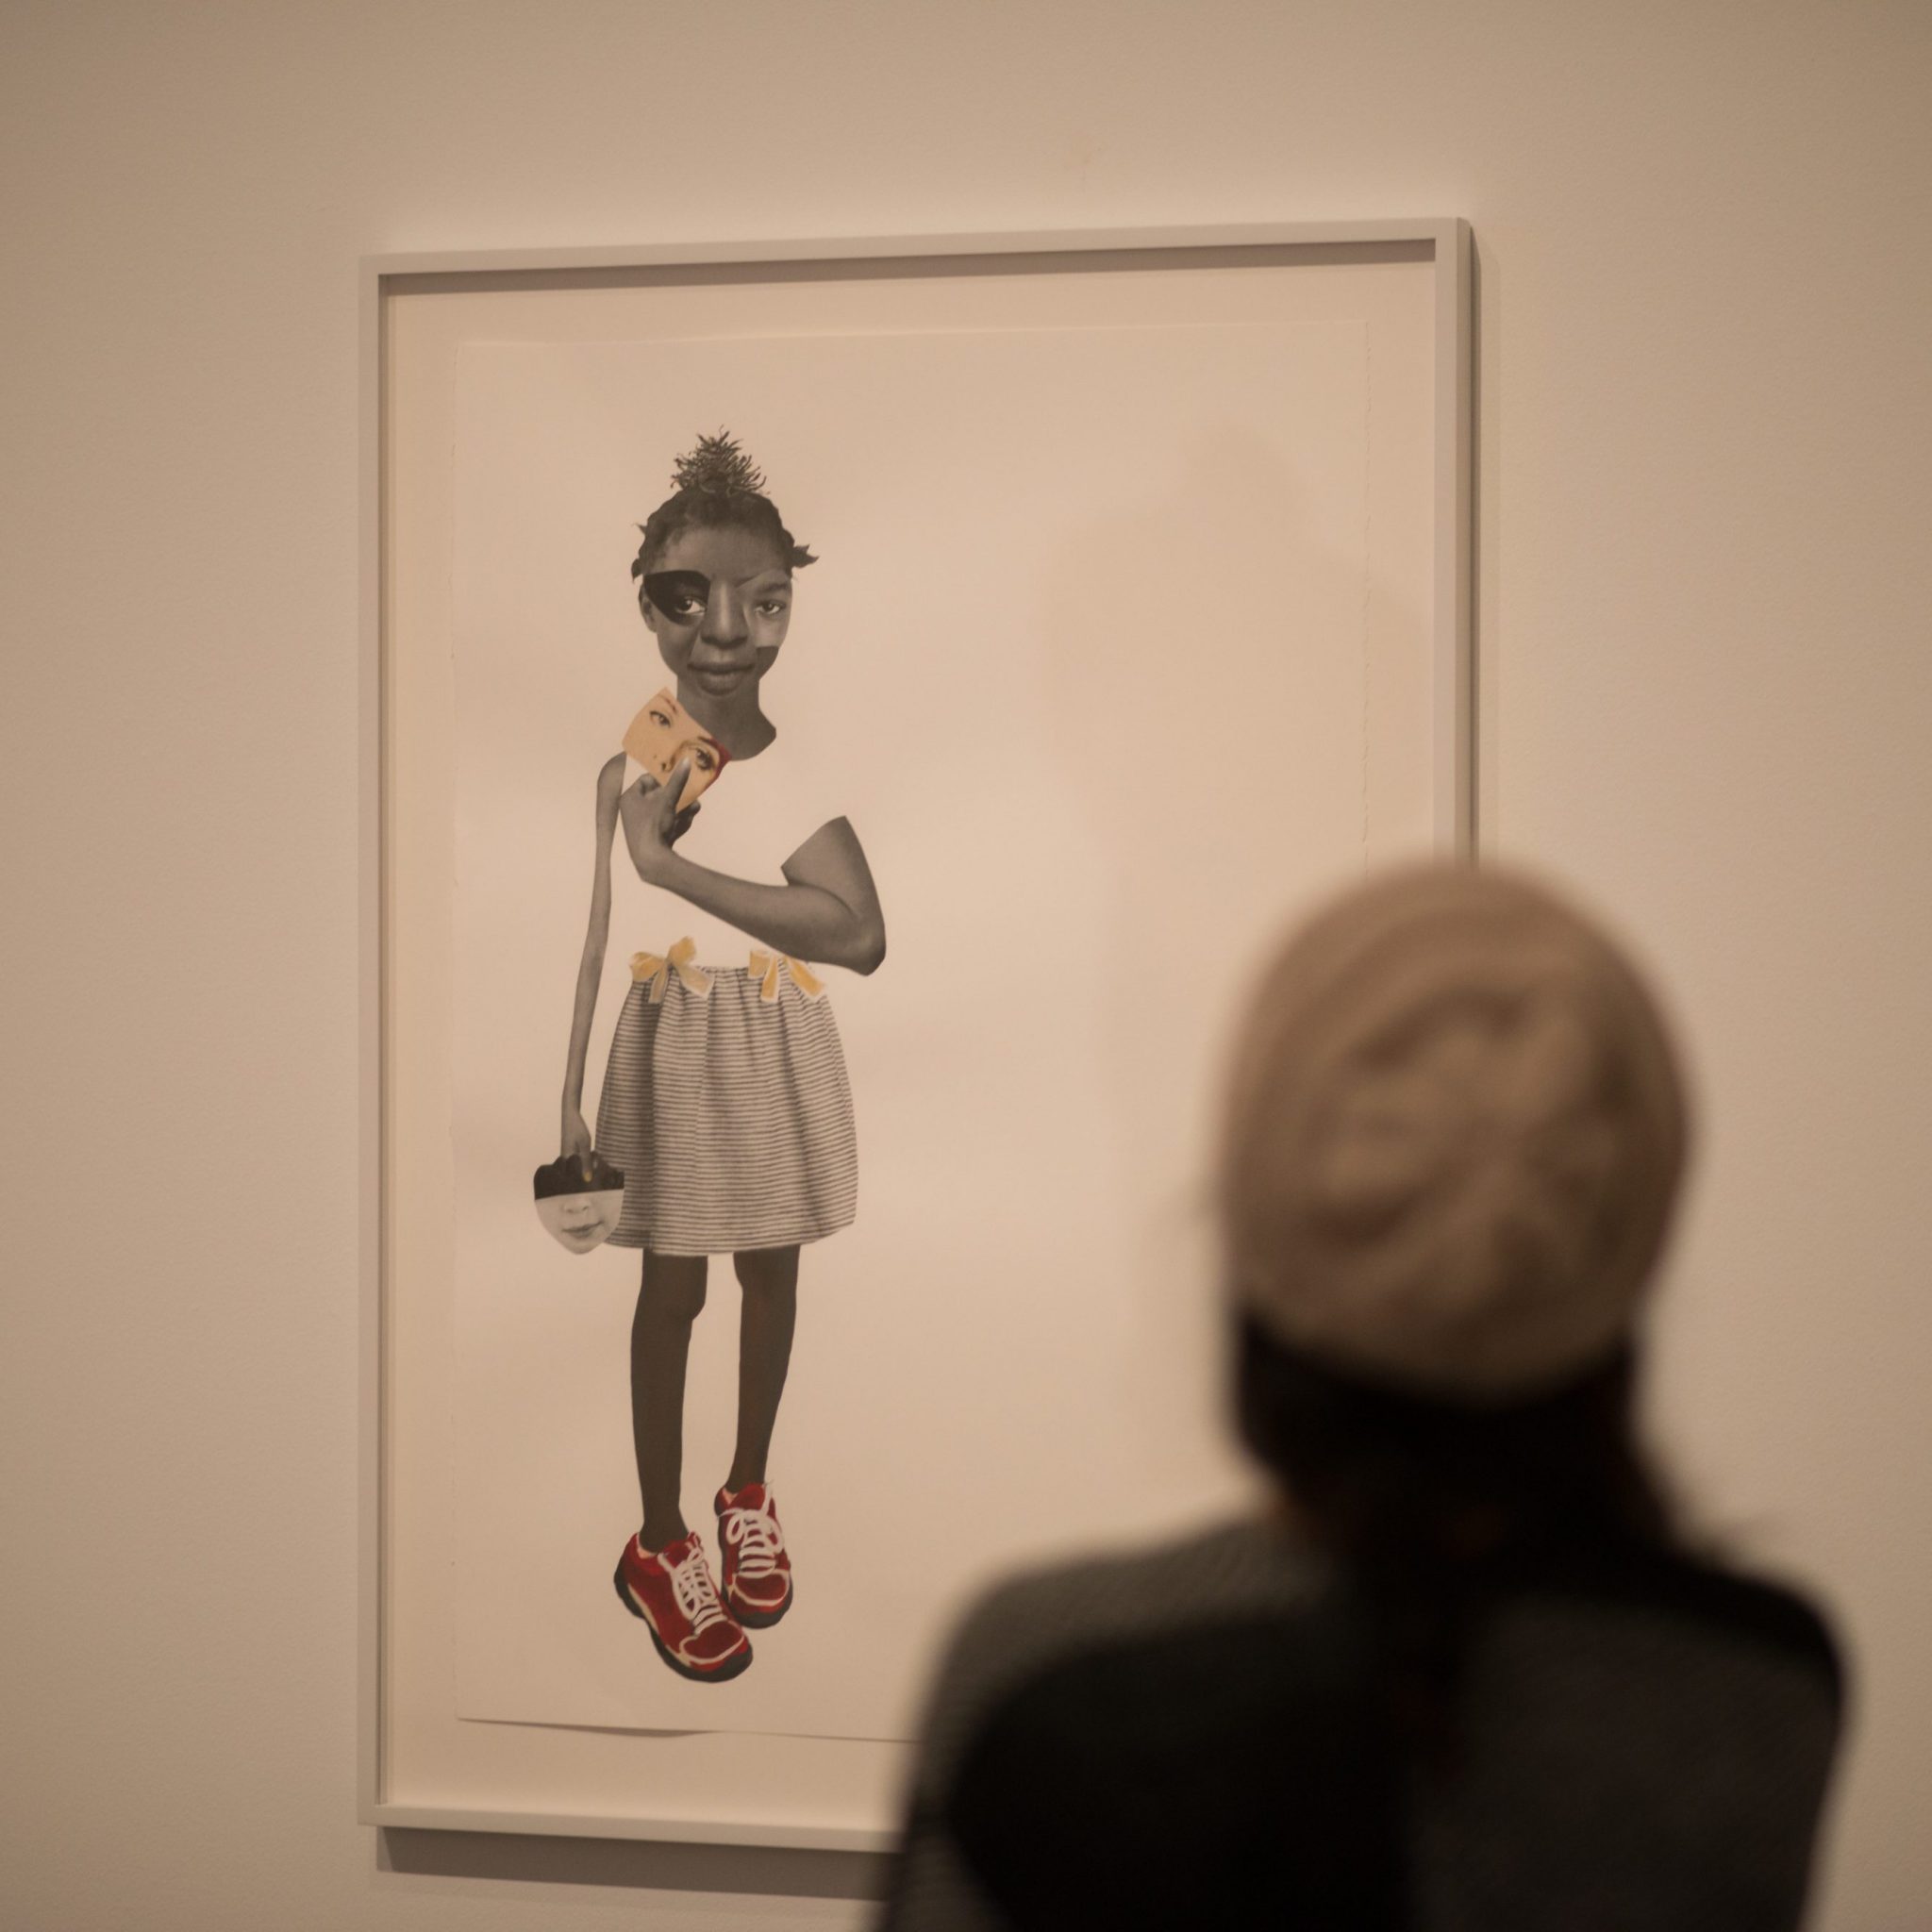 A person wearing a hat looking at a collage of a young Black girl on the wall